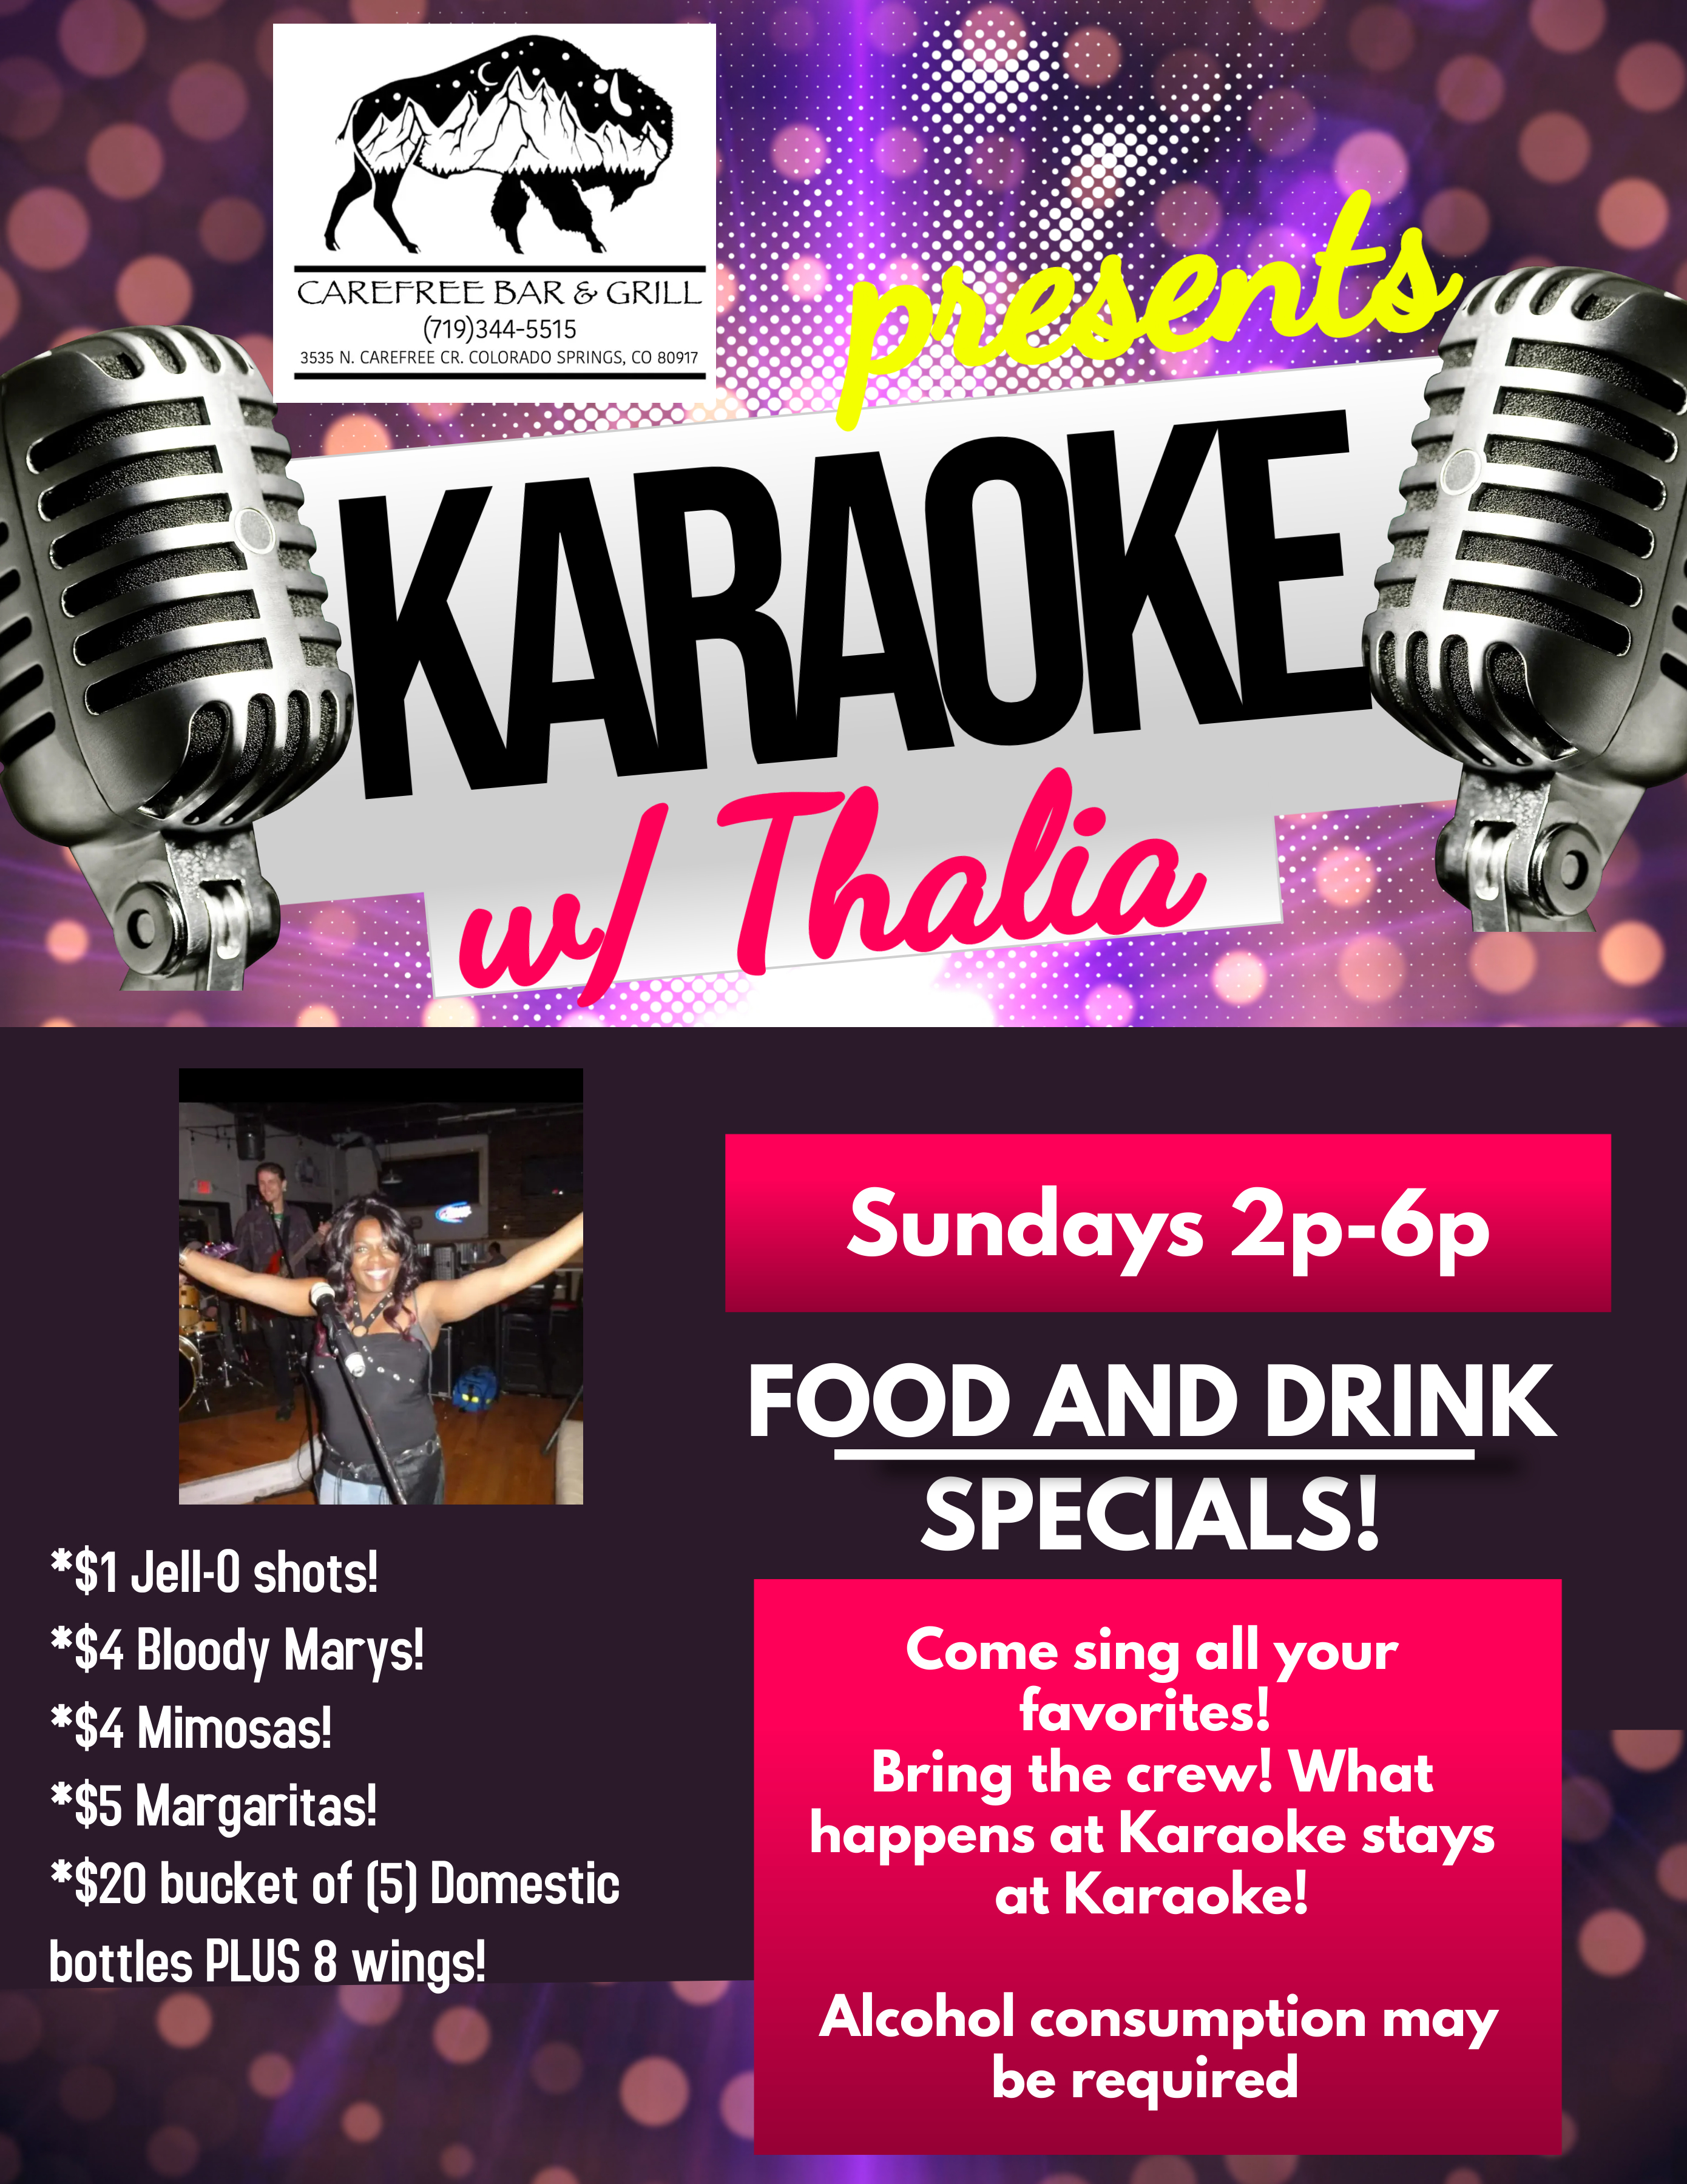 Karaoke with Thalia at Carefree Bar & Grill in Colorado Springs, CO